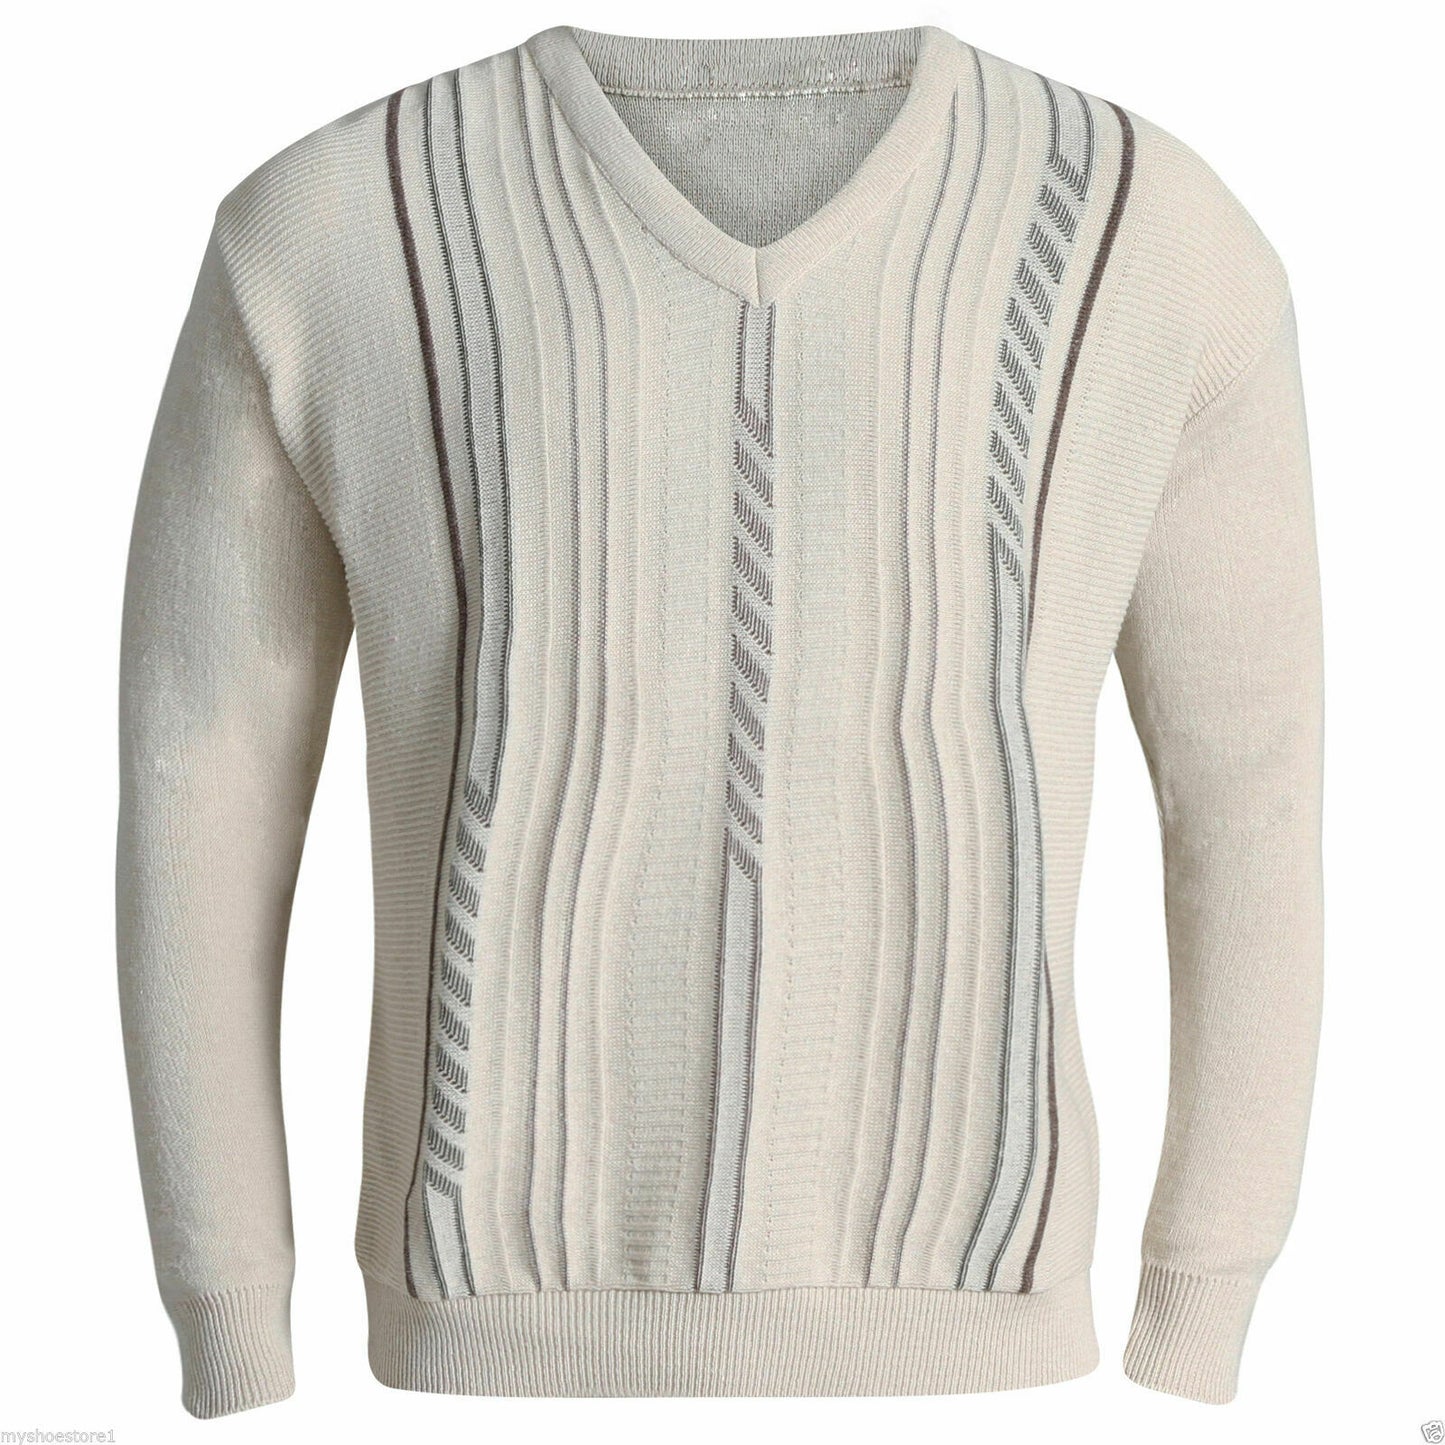 New Mens V Neck Jumper Pullover Sweater Long Sleeve Knitted Top Soft New Stripe